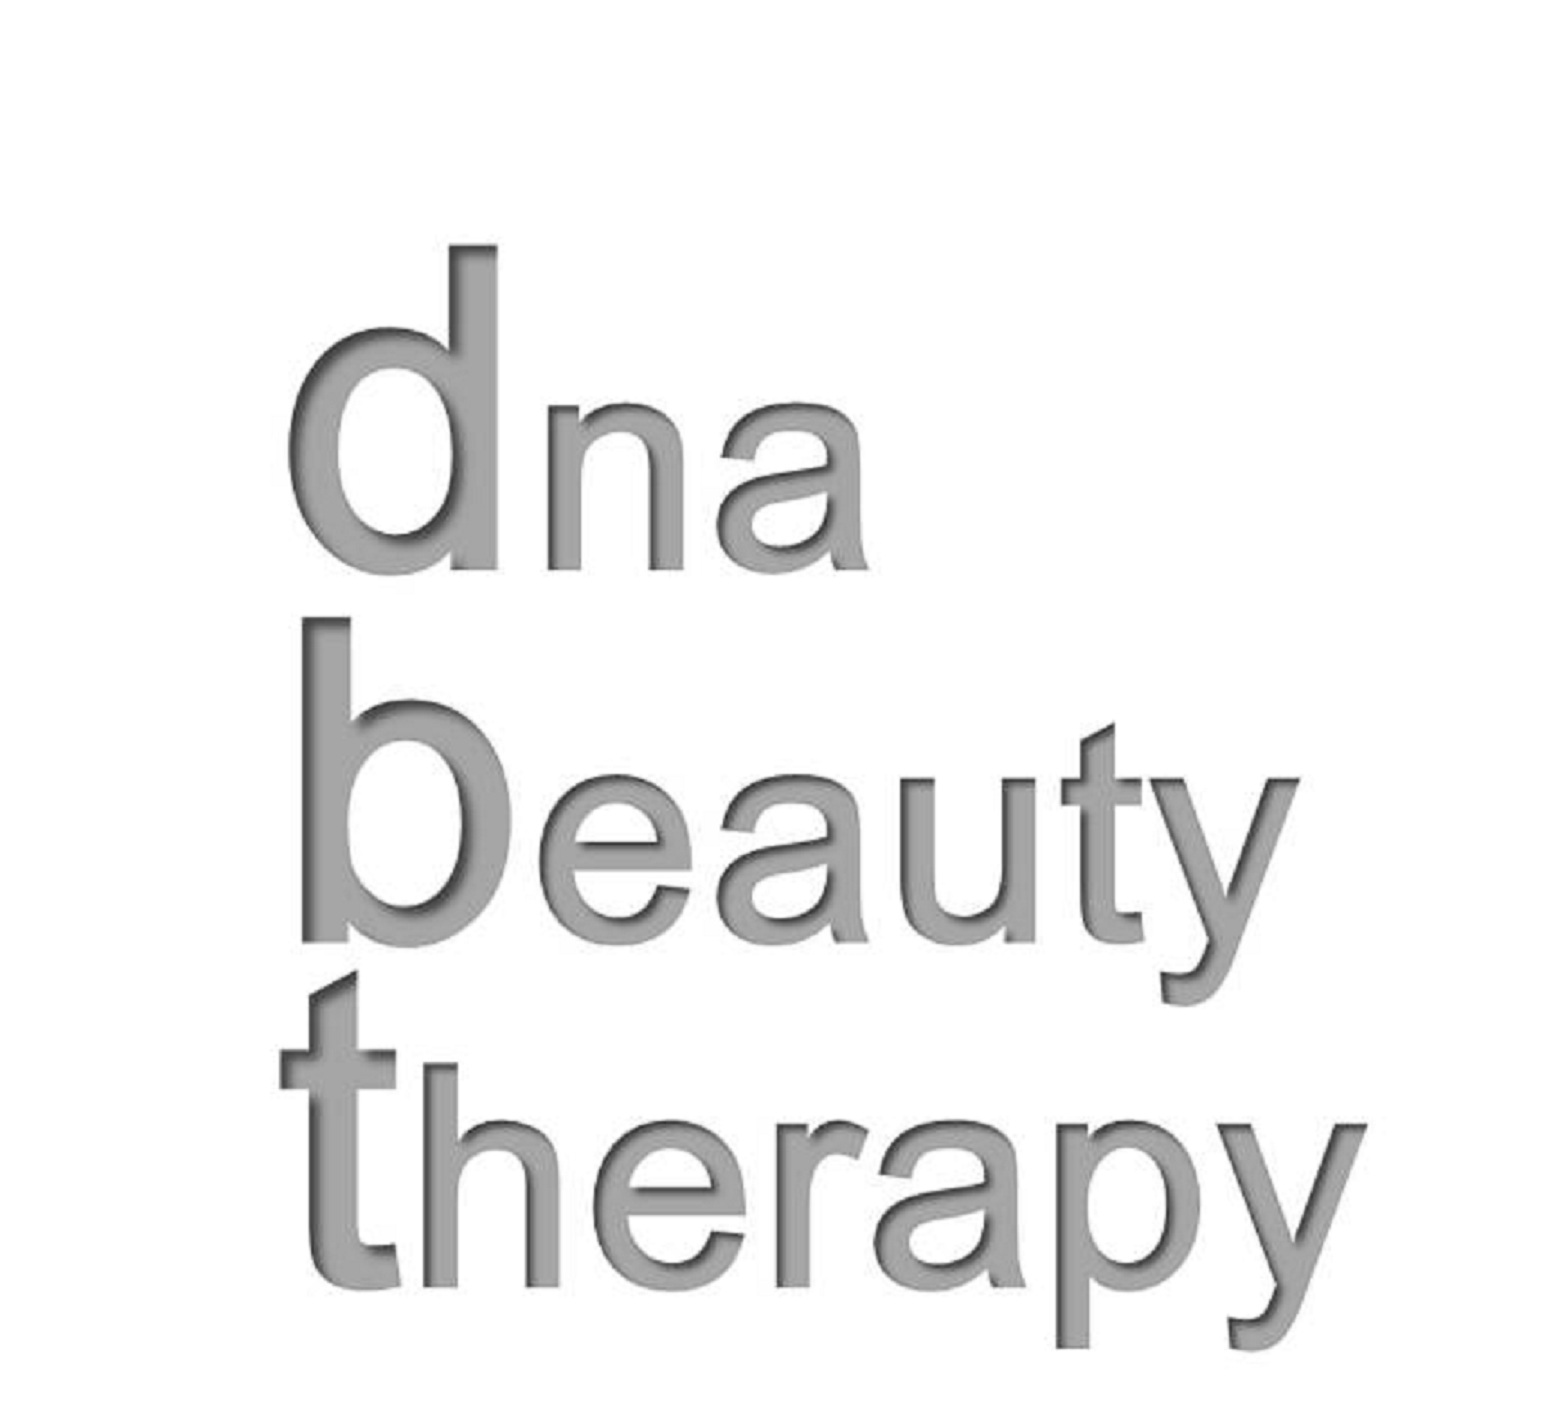 DNA Beauty Therapy